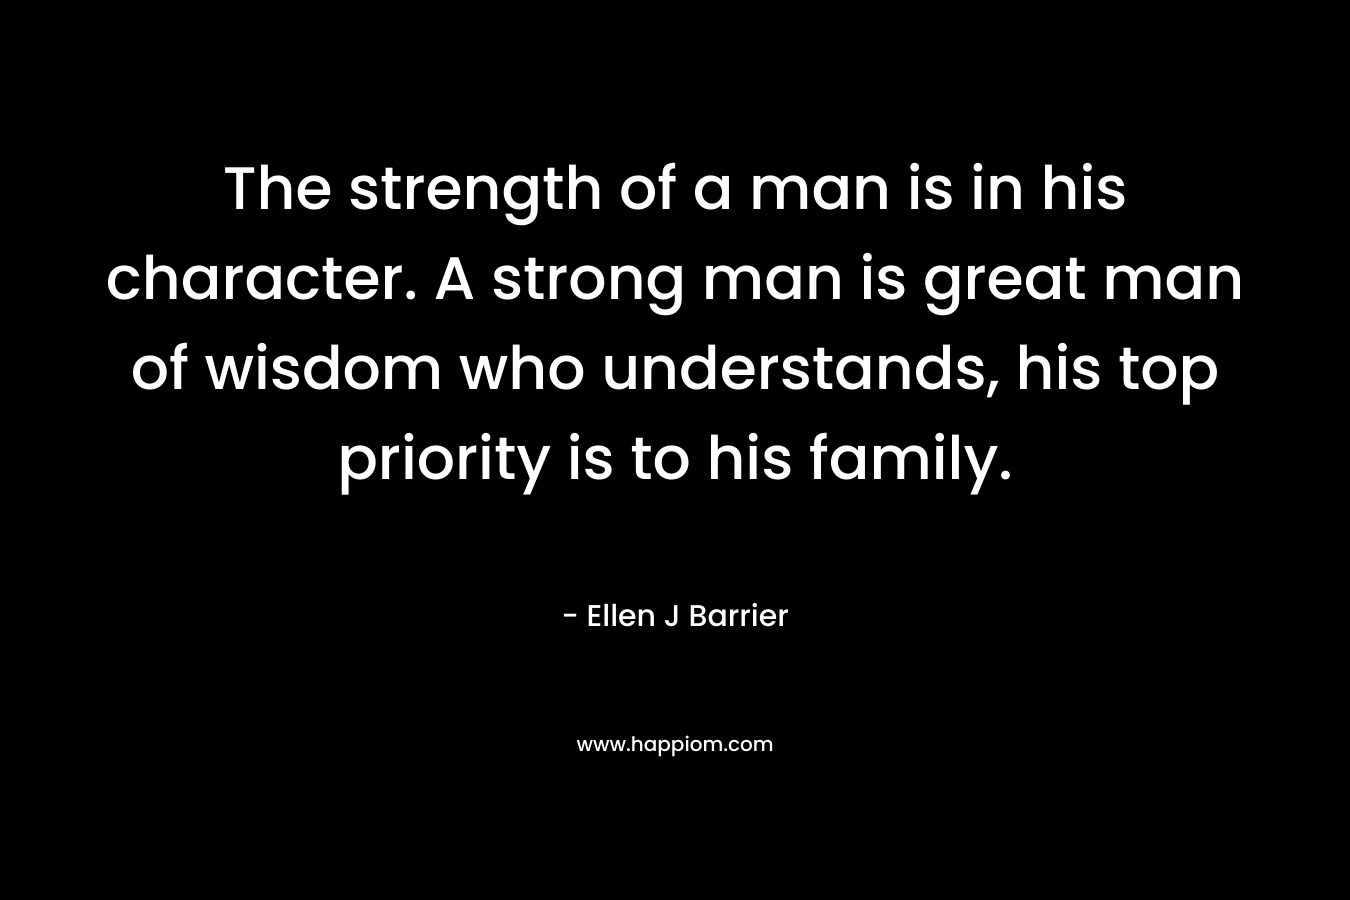 The strength of a man is in his character. A strong man is great man of wisdom who understands, his top priority is to his family.